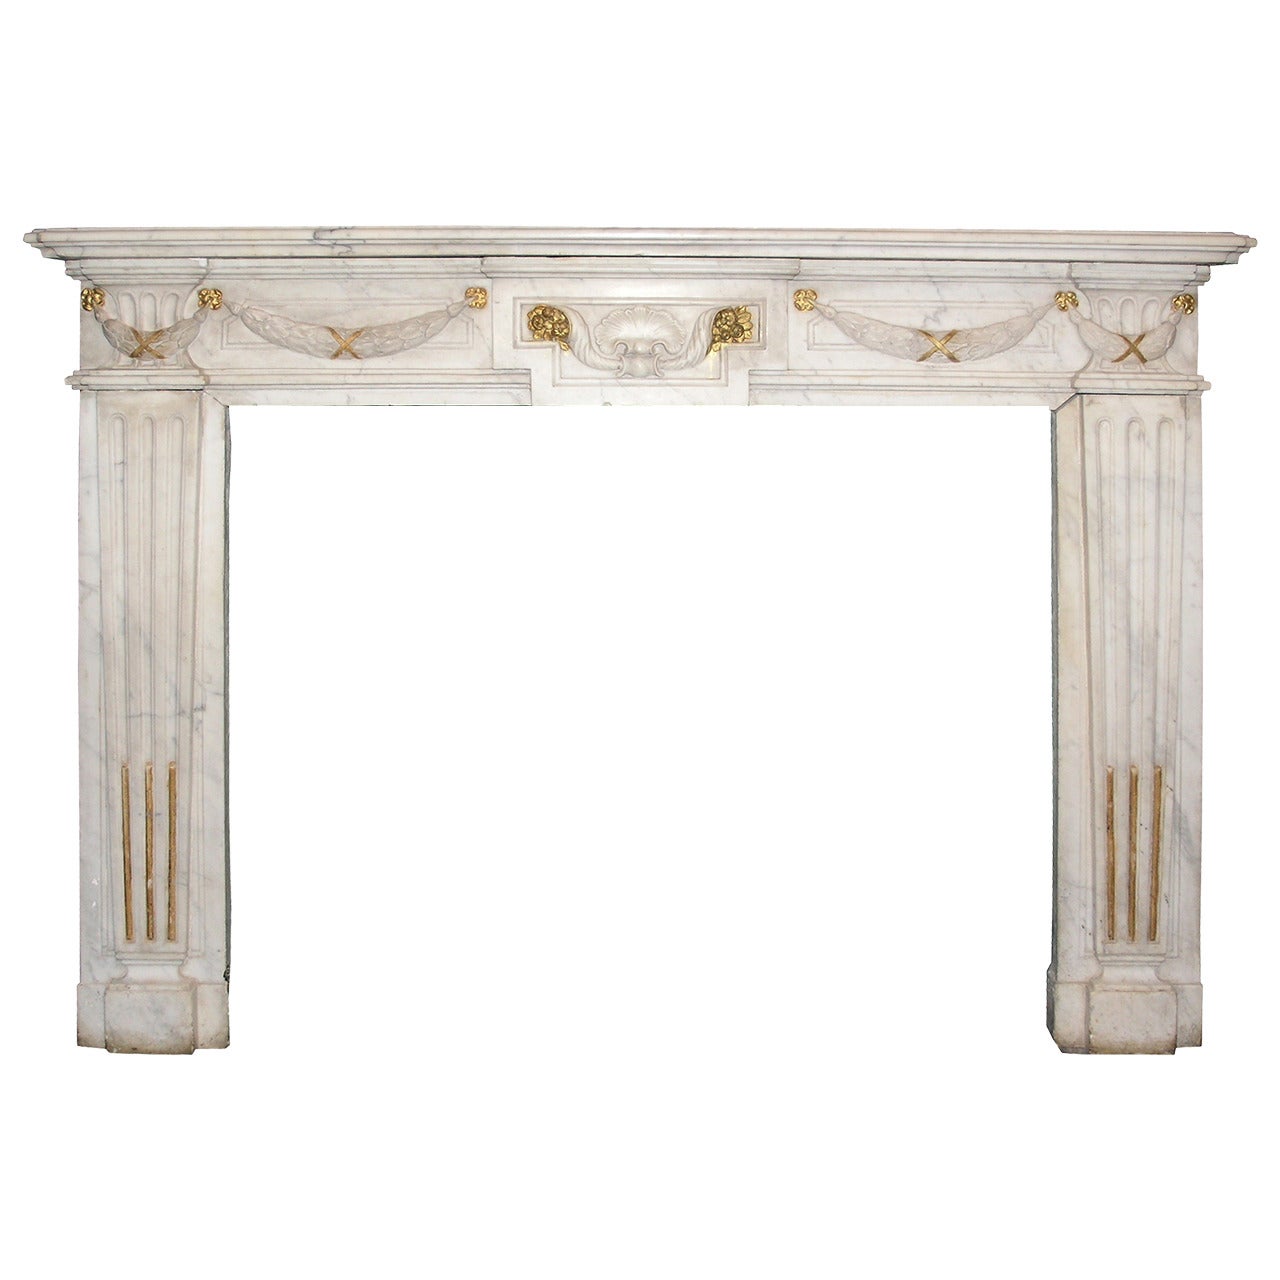 Antique Fireplace Made of Carrara Marble with Golden Detail